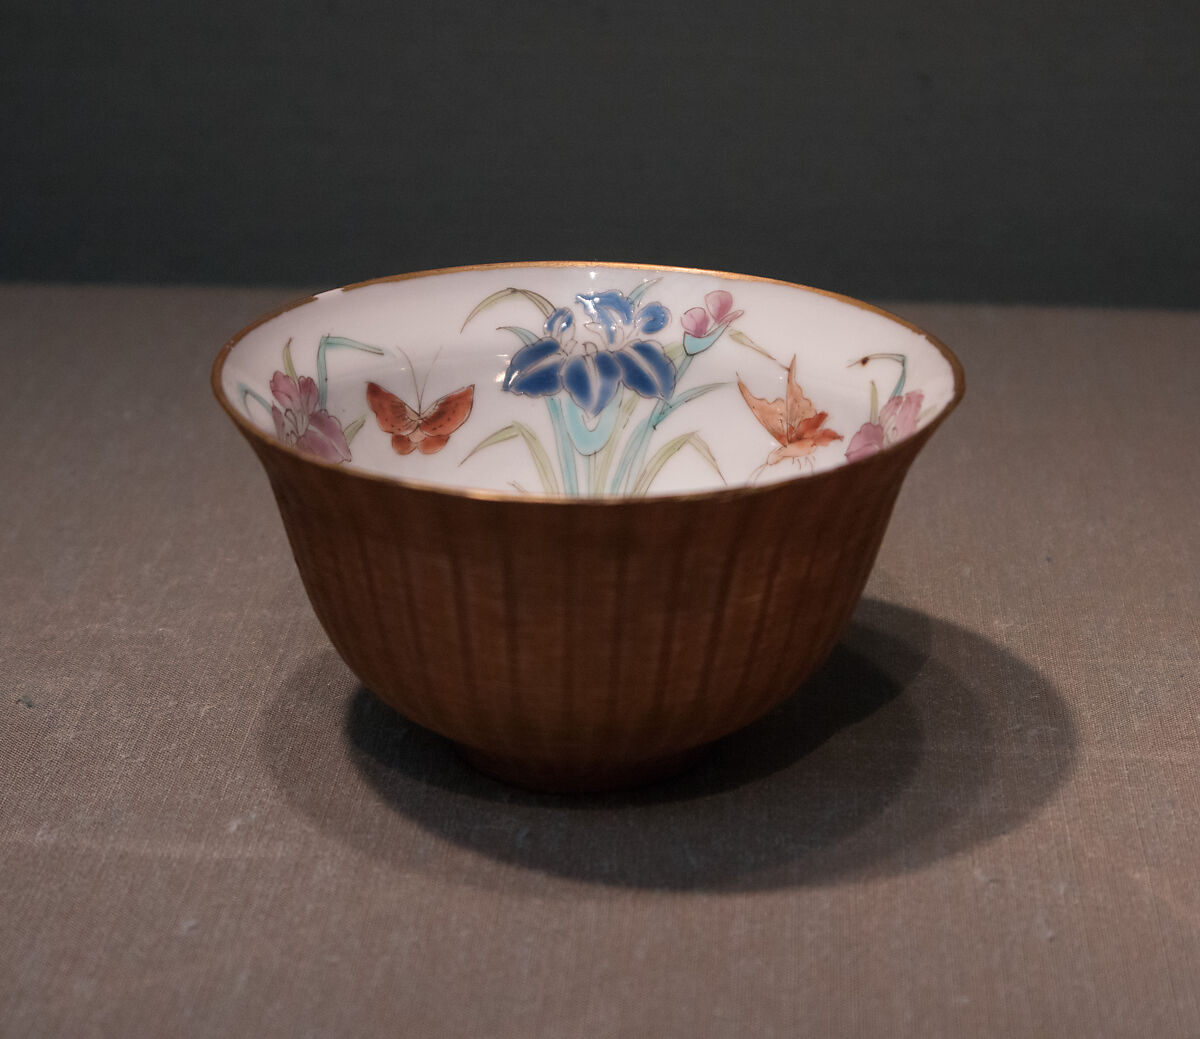 Cup with Butterflies-and-Iris Design and Basketry Exterior, Zōshuntei Sanpo (brand name used 1841–78), Porcelain with overglaze polychrome enamels, fine basketwork exterior (Arita ware, product of Hisatomi Yojibei), Japan 